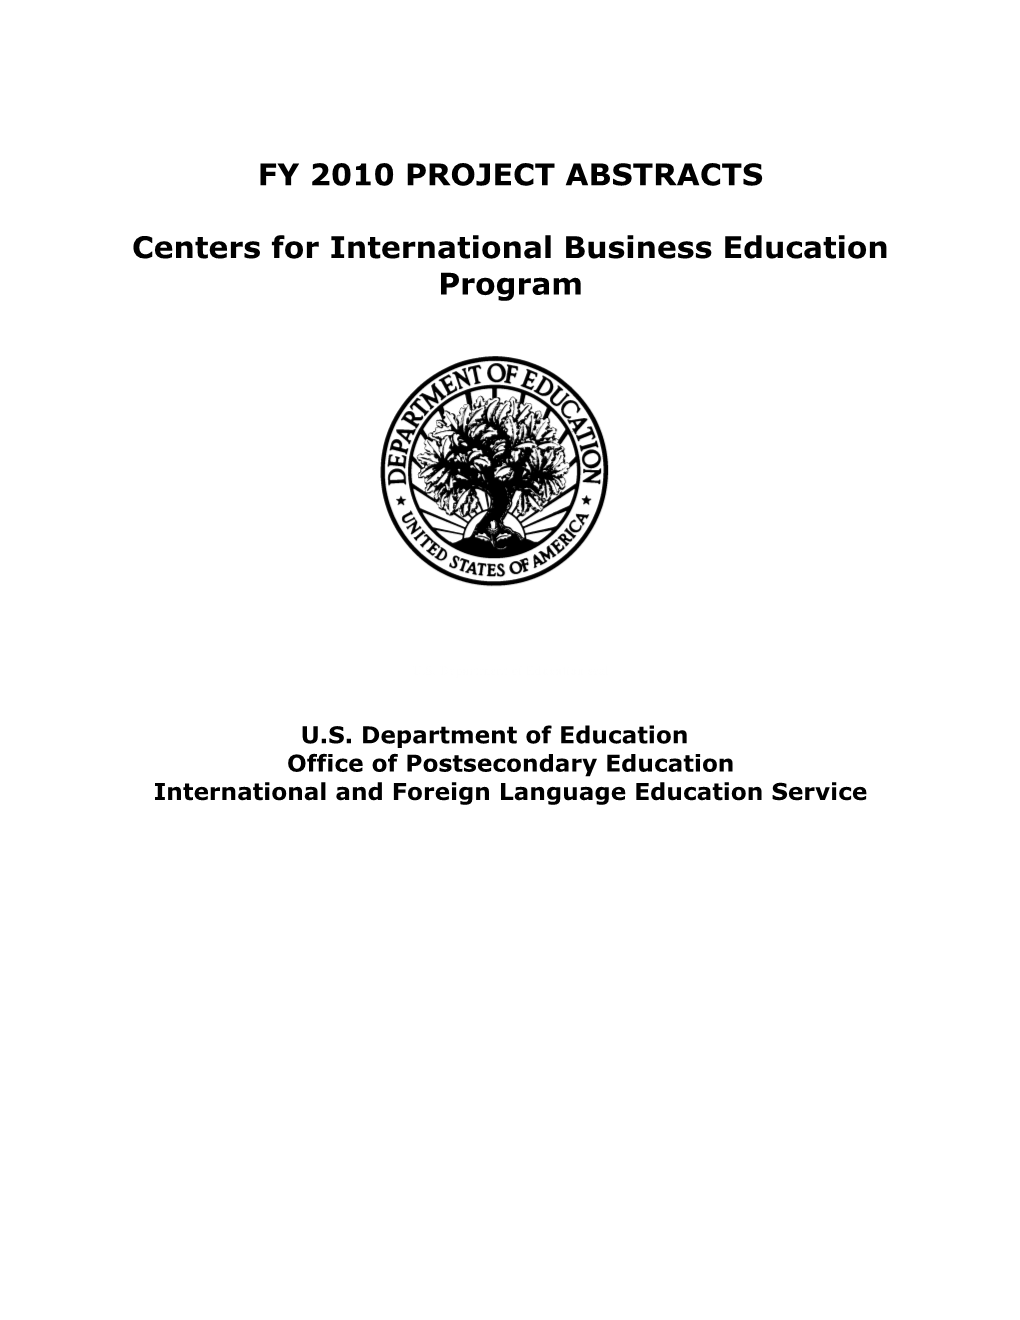 Centers for International Business Education - FY 2010 Project Abstracts (MS Word)